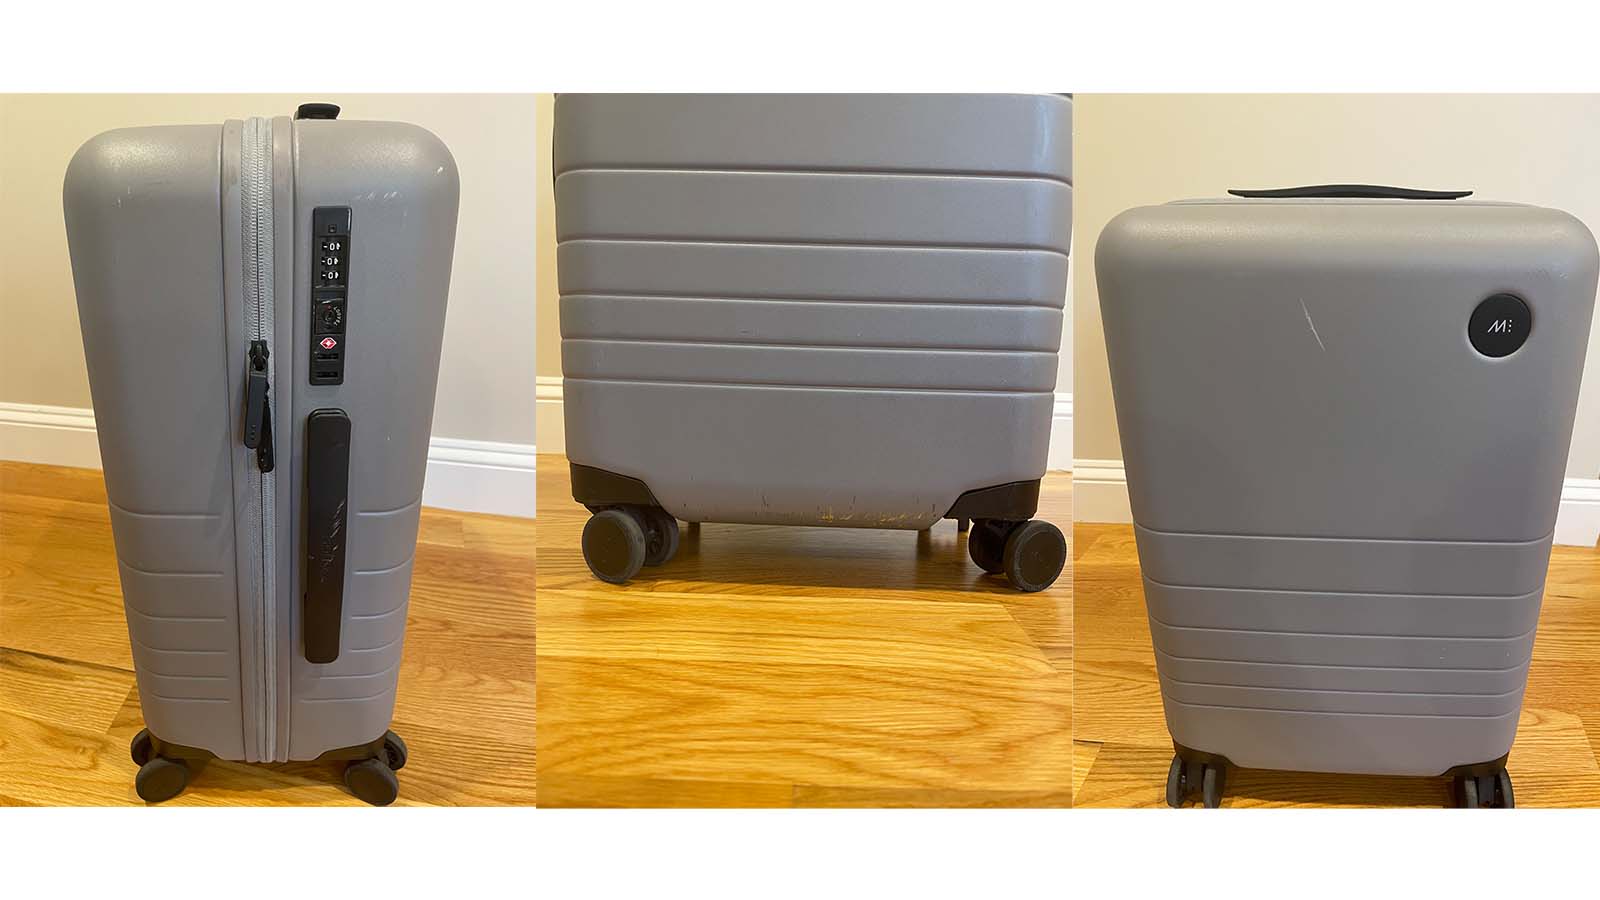 Monos Carry-on Pro Luggage Review 2023